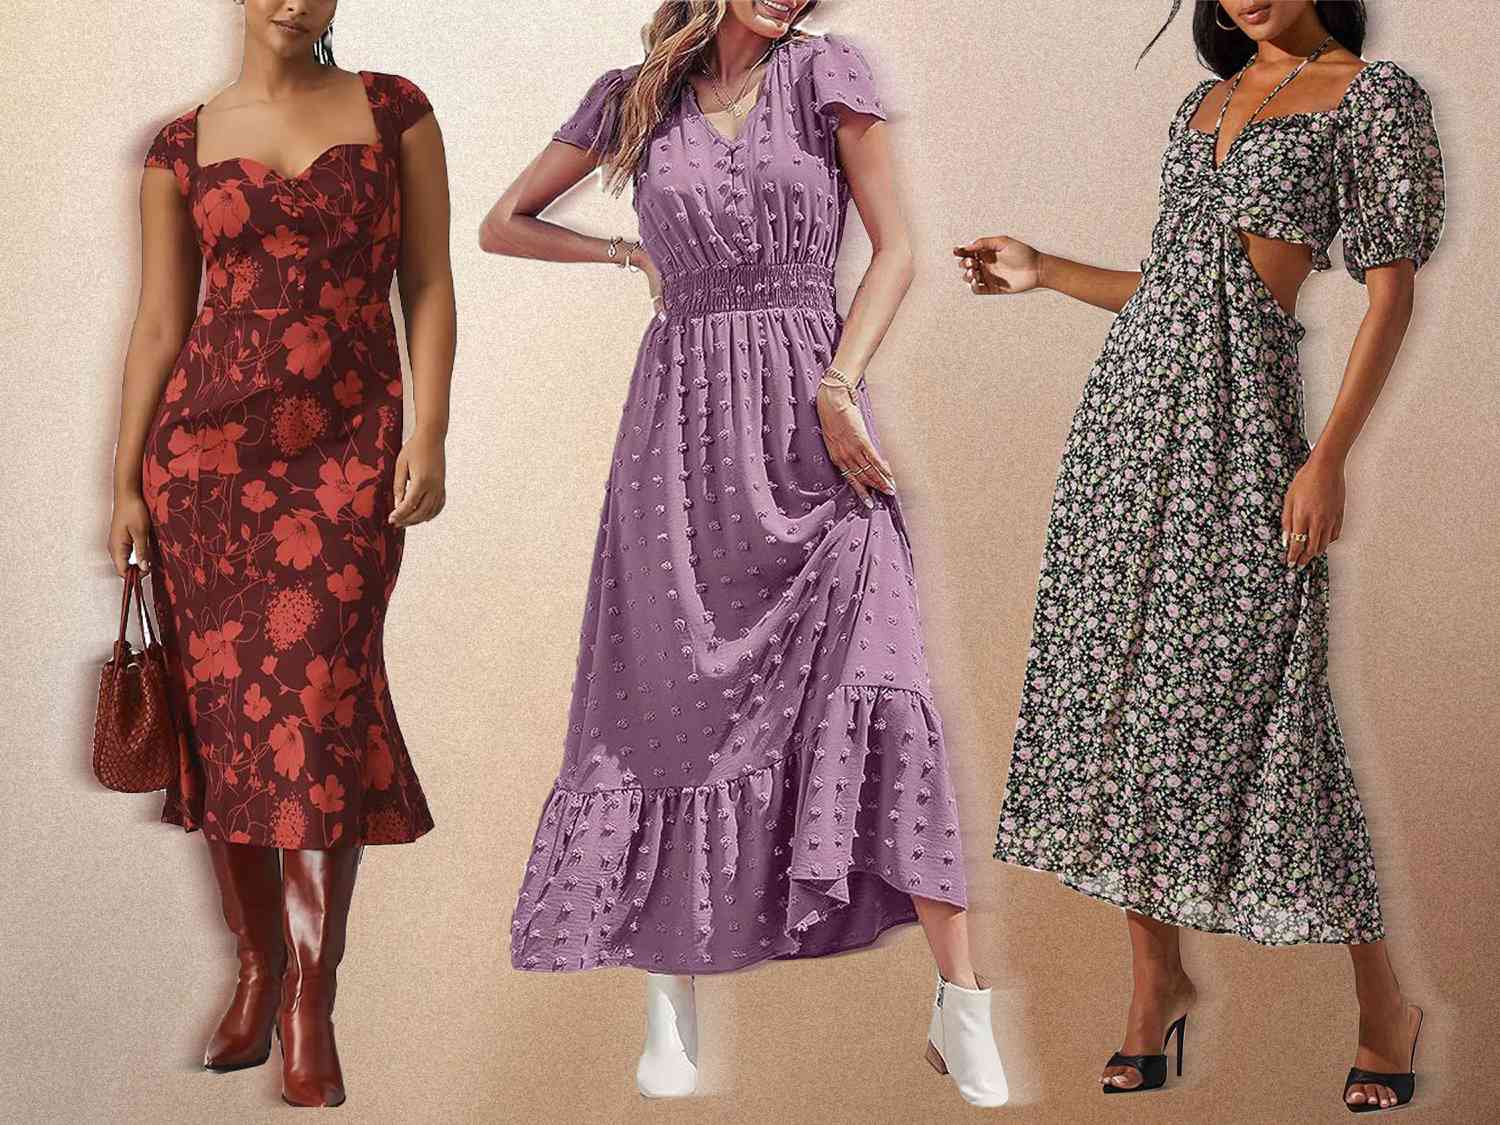 Why Is Internet Shopping for Women's Dresses Preferable?